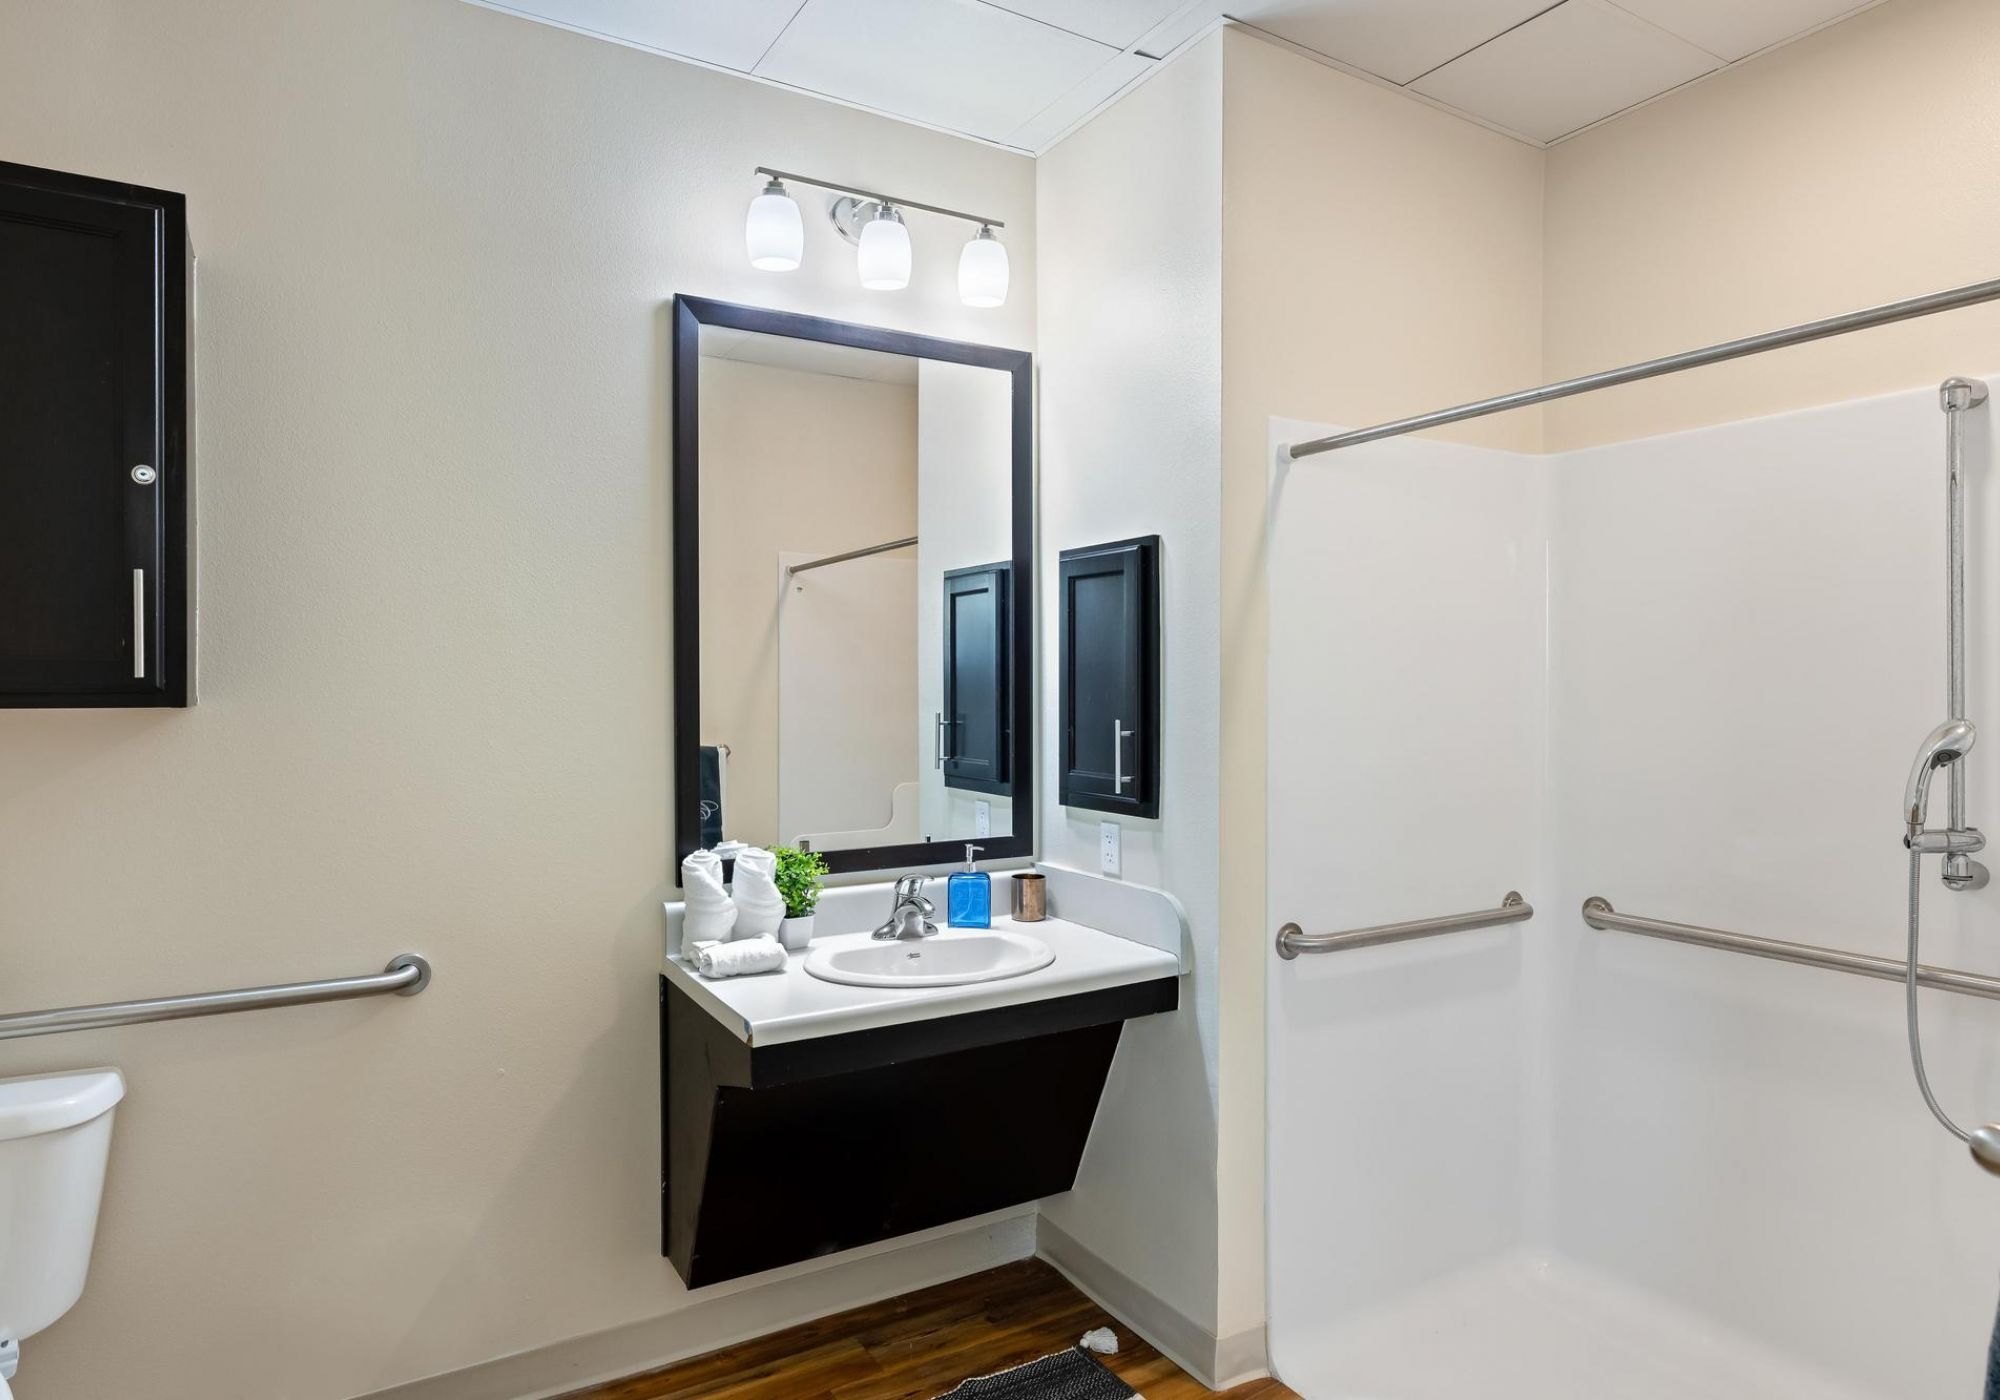 The Claiborne at Baton Rouge senior living community bathroom showing accessibility features including handrails, lower sink height, and zero-entry shower